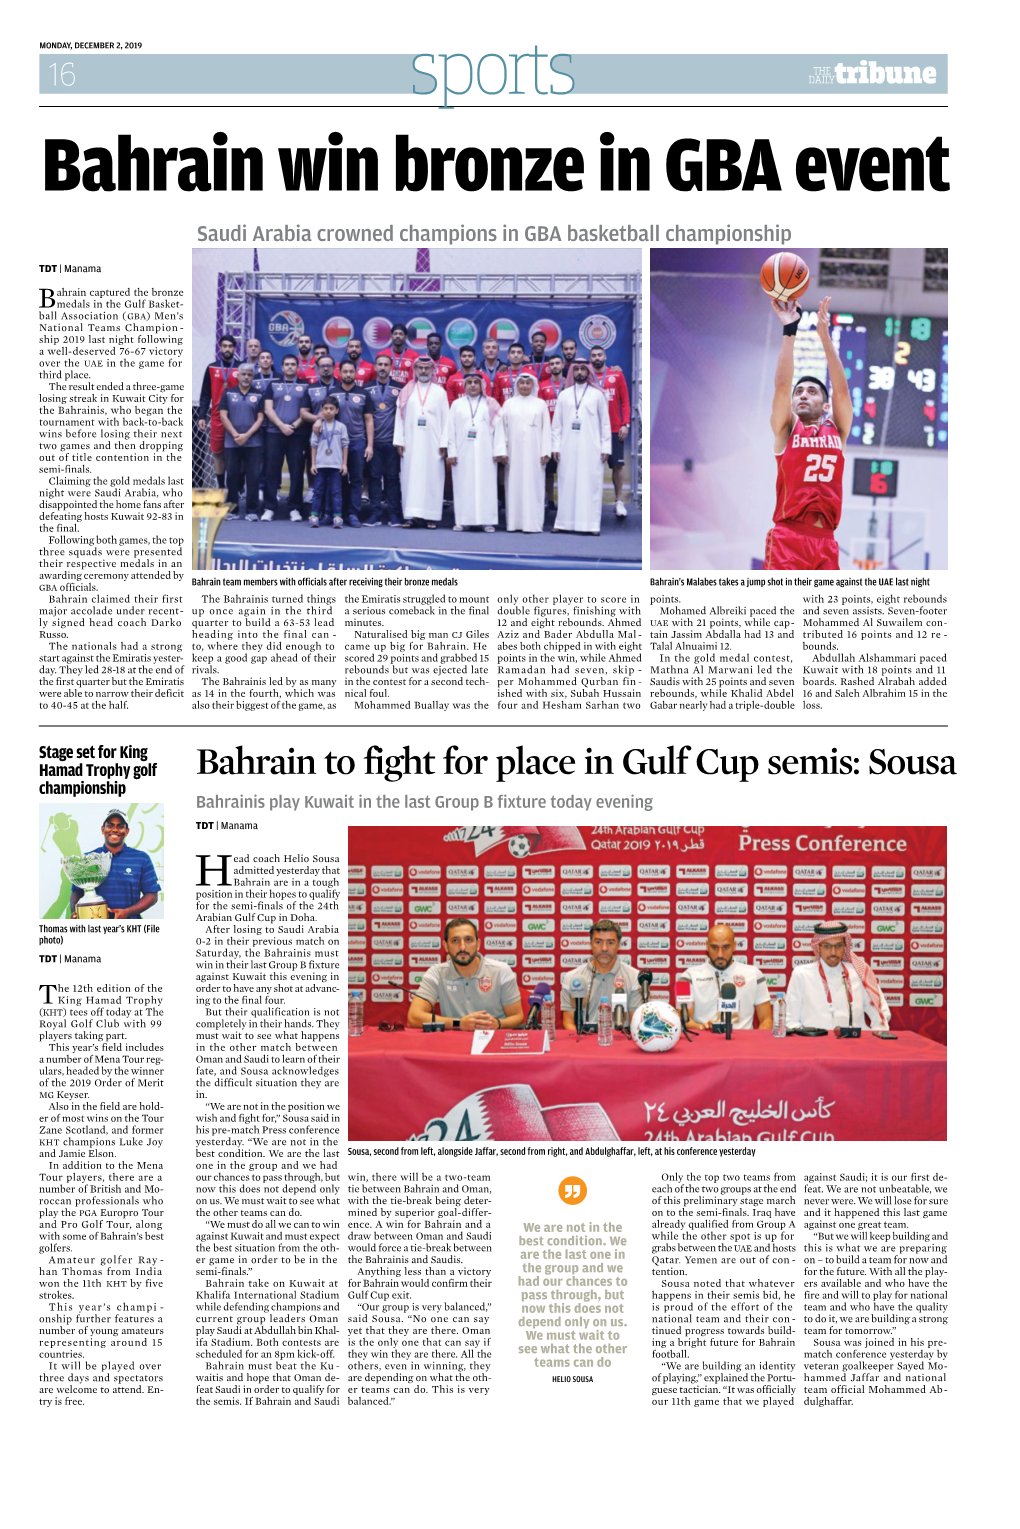 Bahrain to Fight for Place in Gulf Cup Semis: Sousa Championship Bahrainis Play Kuwait in the Last Group B Fixture Today Evening TDT | Manama